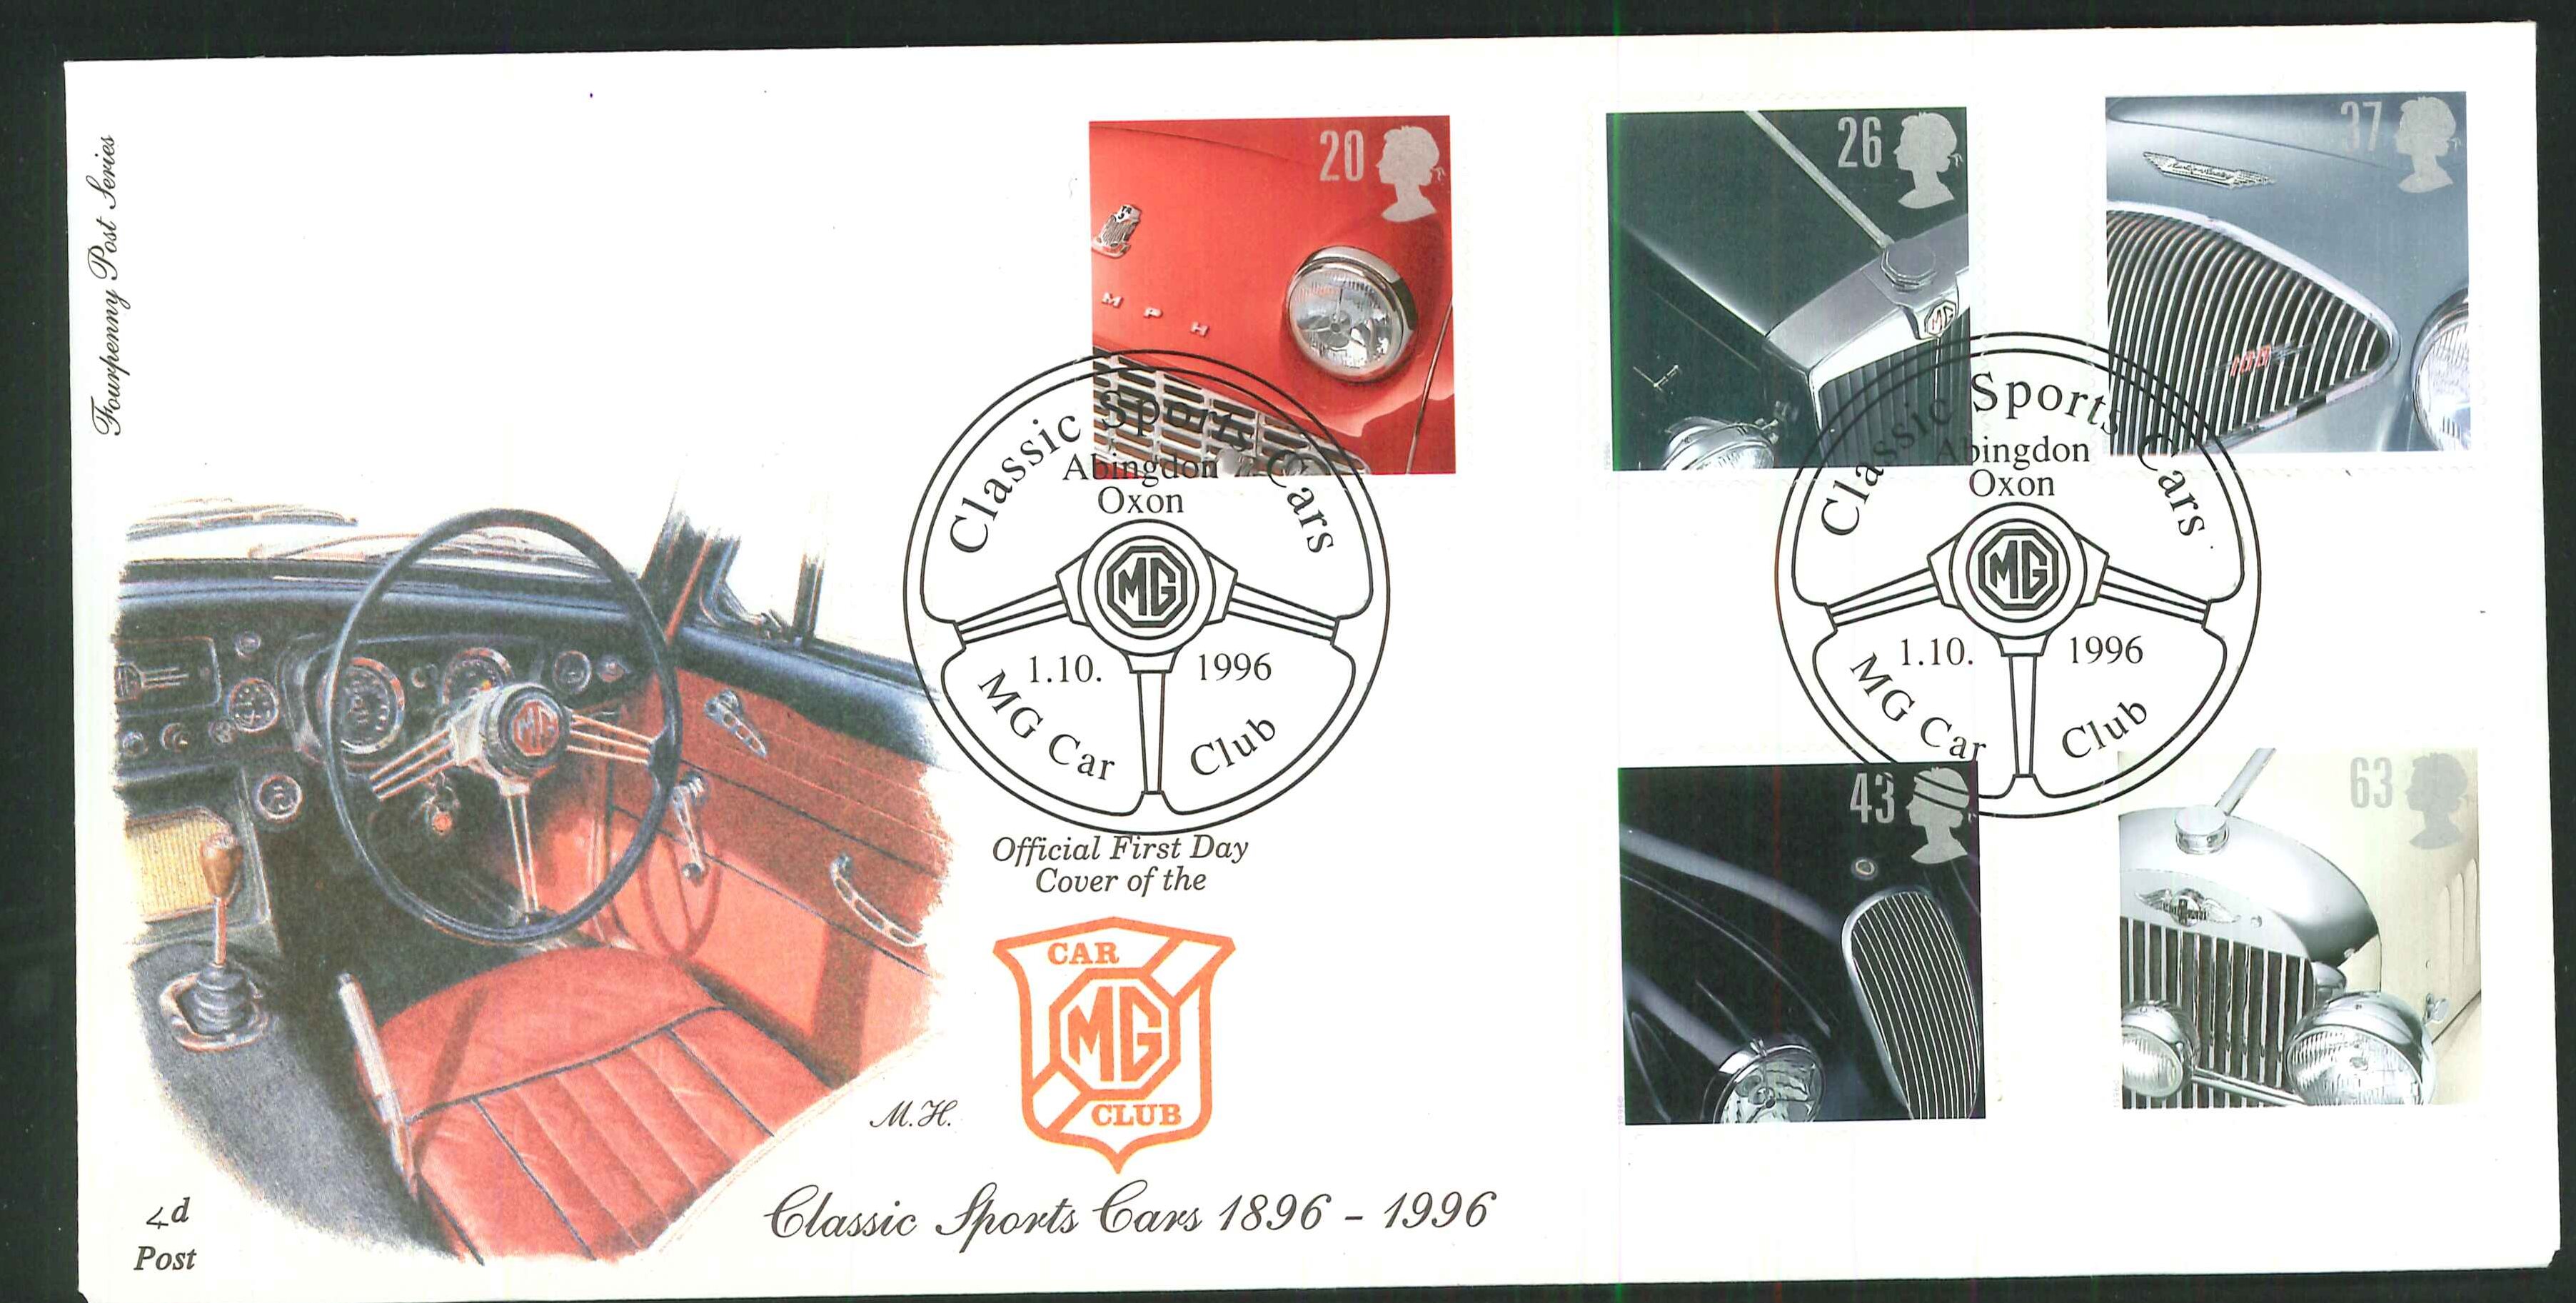 1996 - Classic Sports Cars 1896 - 1996, First Day Cover - MG Car Club, Abingdon, Oxon Postmark - Click Image to Close